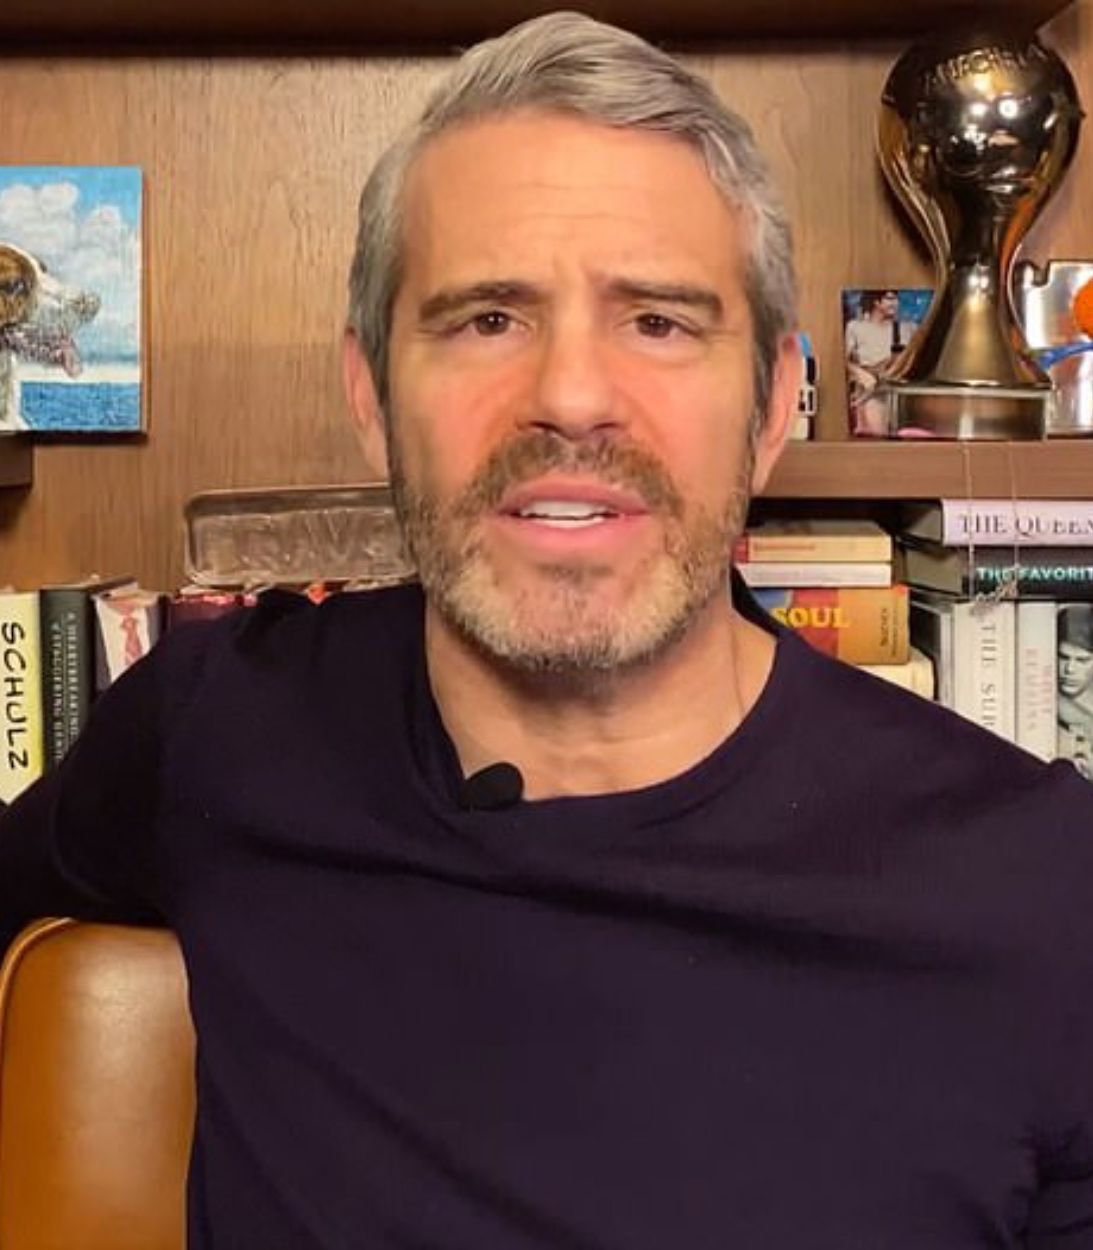 Bravo Andy Cohen TLDR